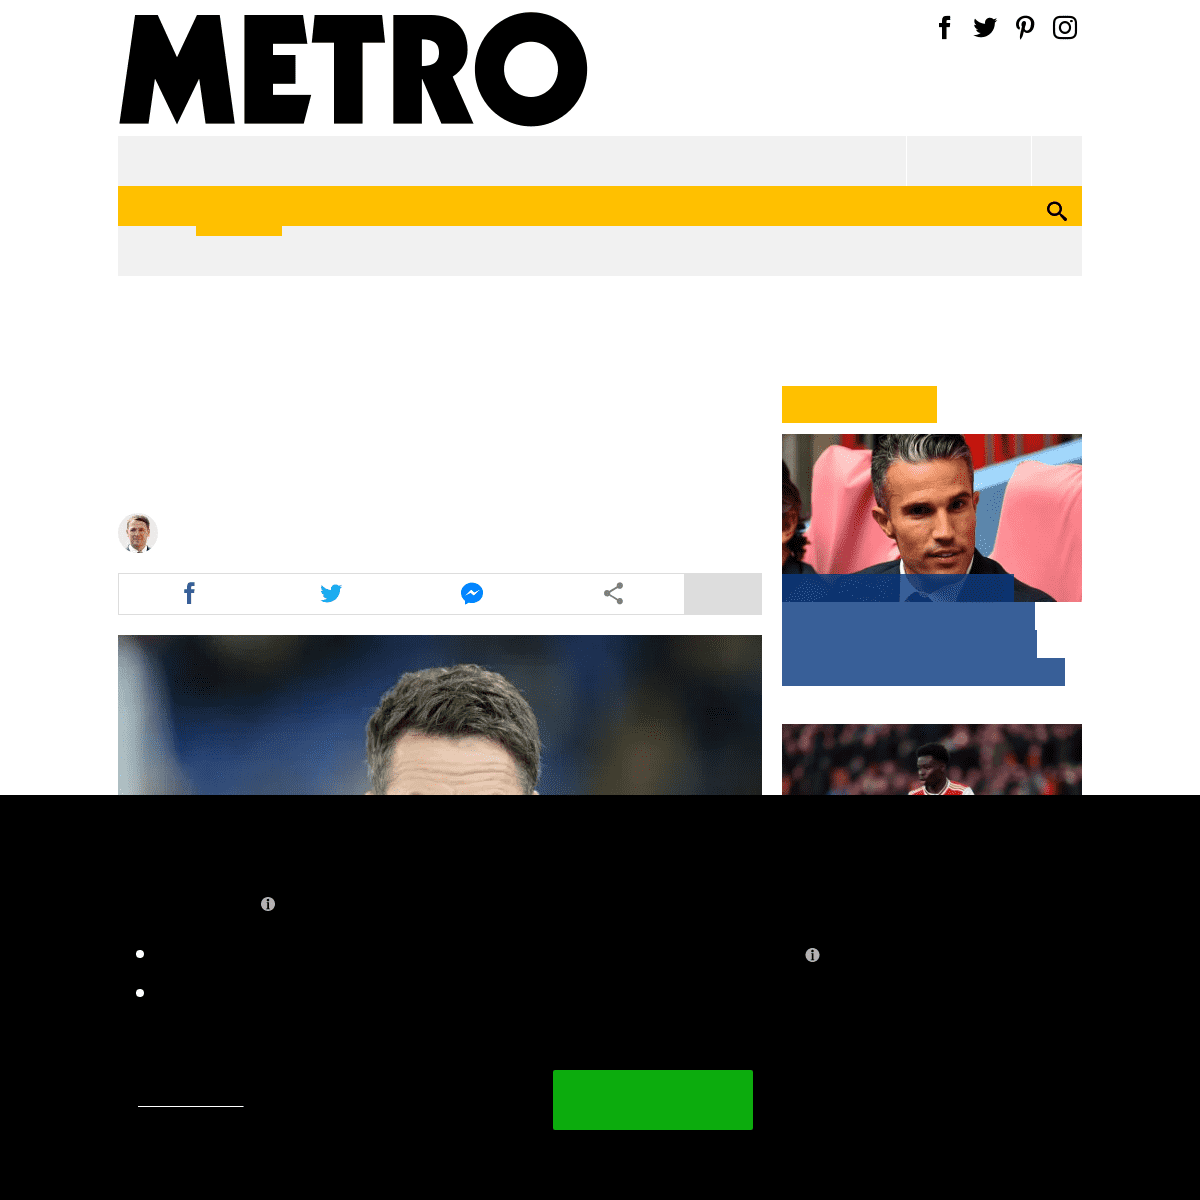 A complete backup of metro.co.uk/2020/02/17/michael-owens-champions-league-predictions-including-atletico-madrid-vs-liverpool-12